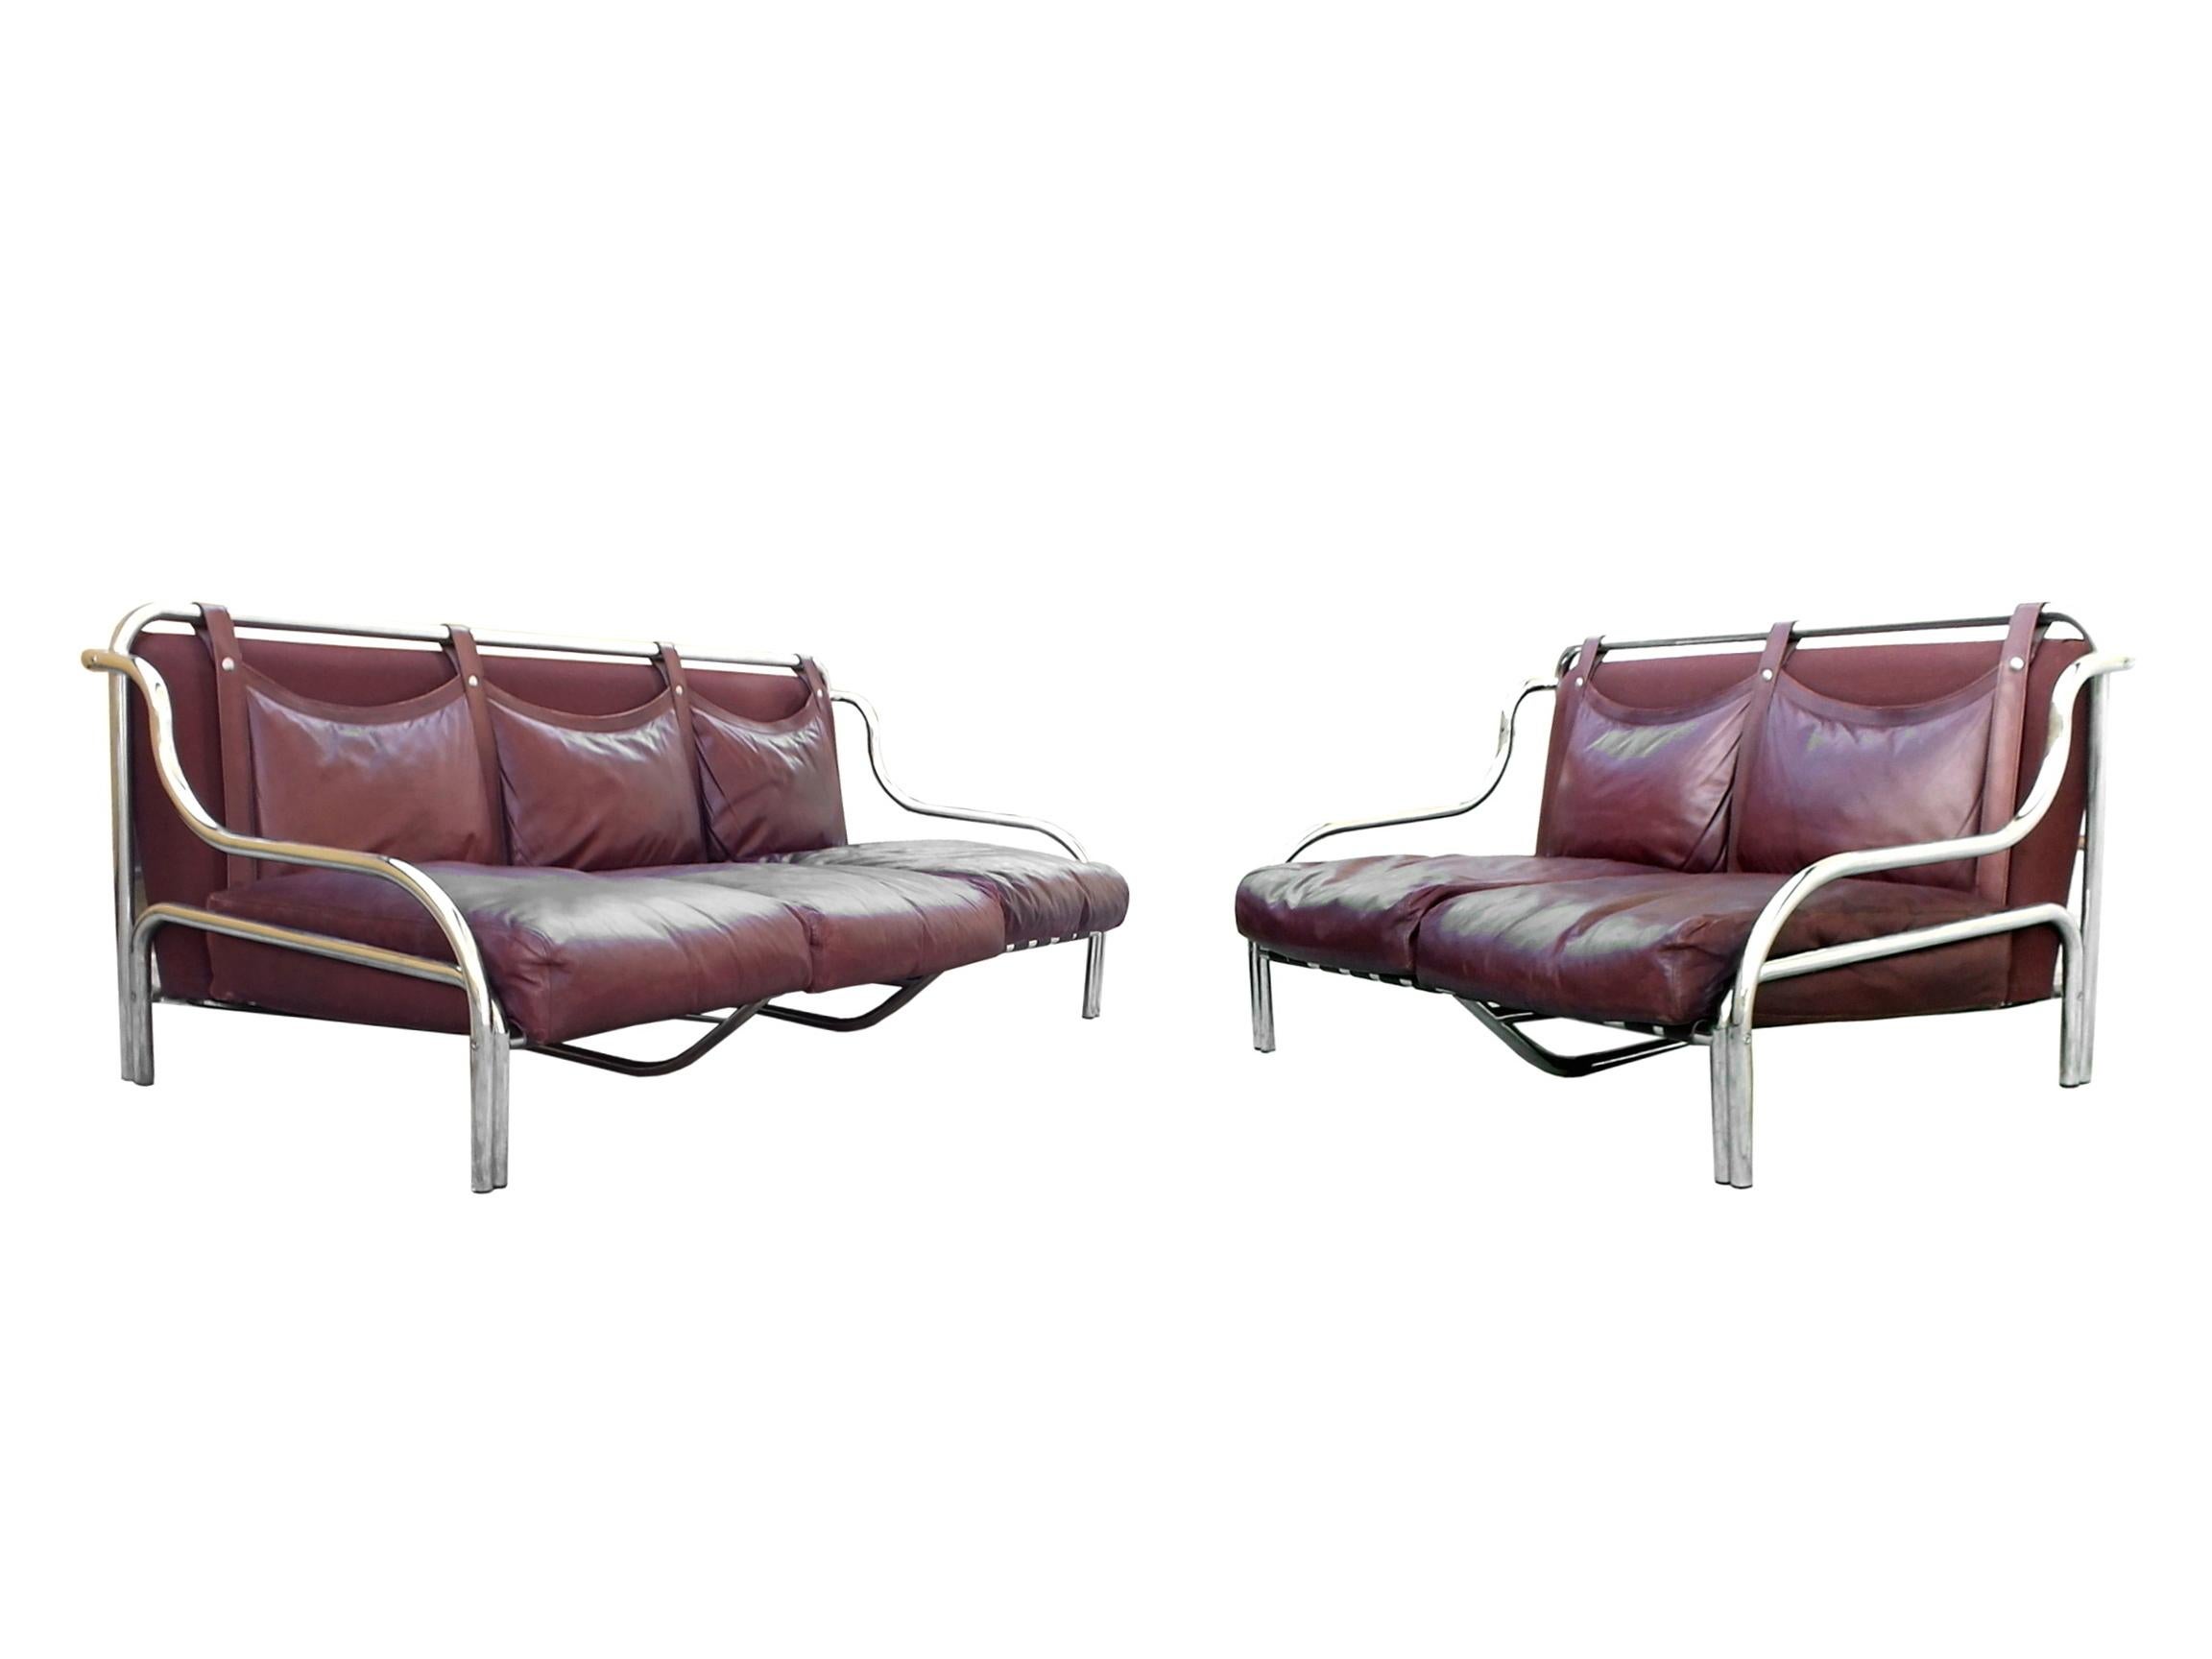 Italian Pair of Vintage Sofas by Gae Aulenti Production Poltronova, Italy, 1965 For Sale